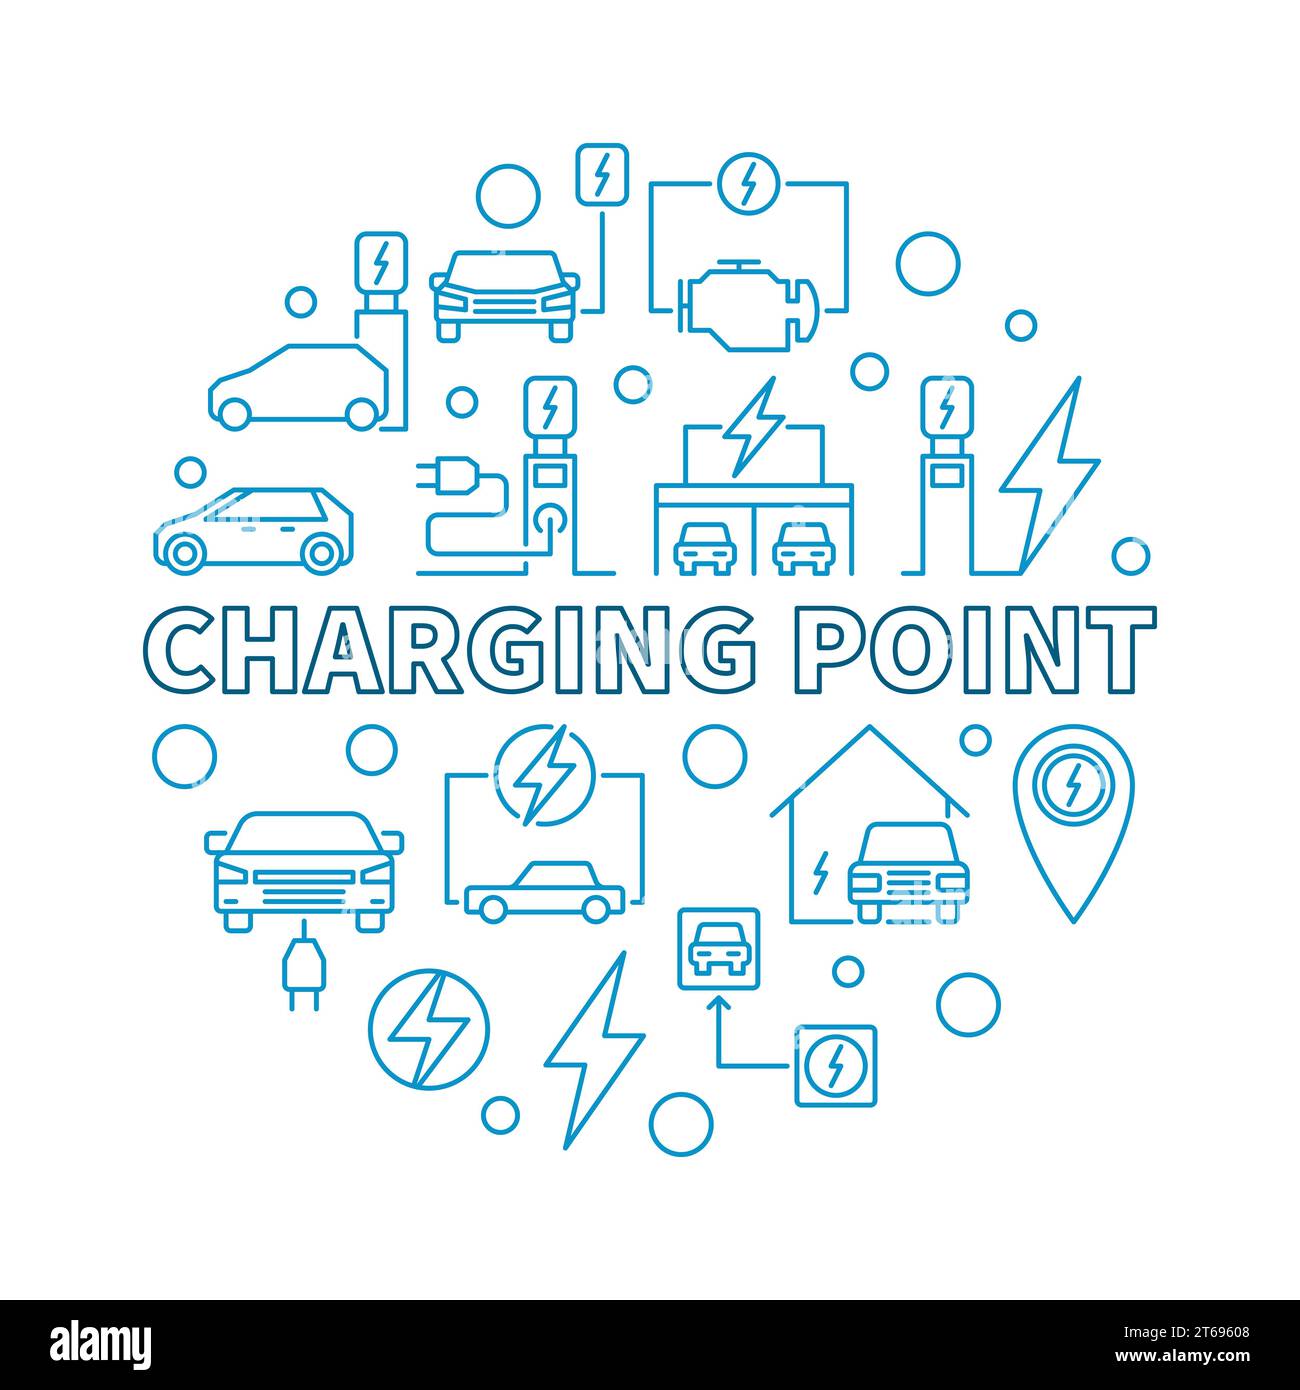 Charging point round vector blue illustration made with charging stations and electric cars outline icons Stock Vector